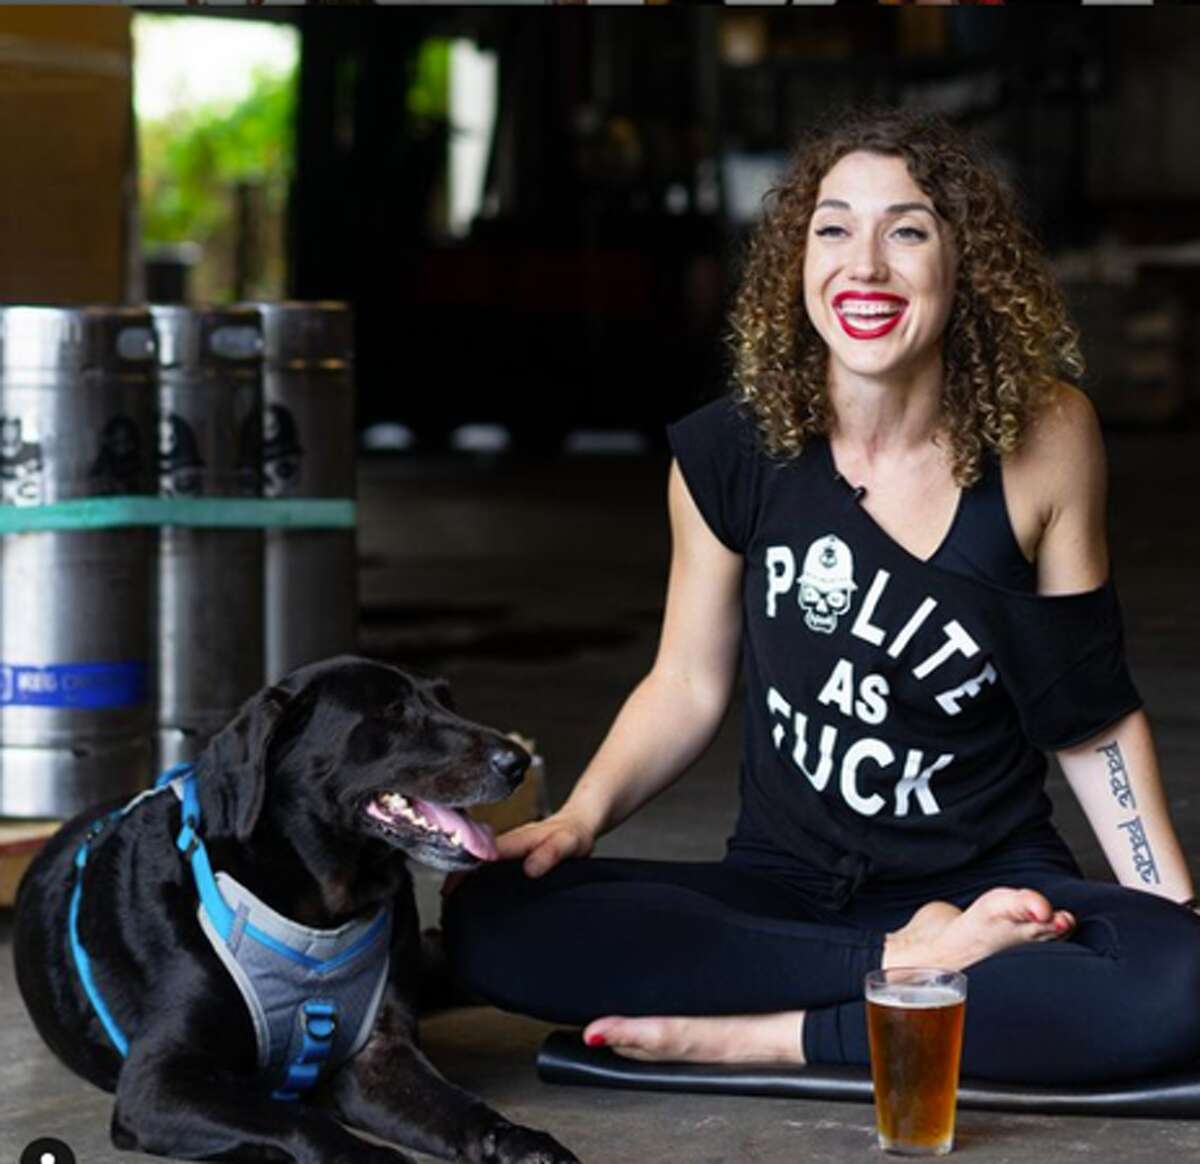 Wearing a T-shirt that expresses some of rage yoga philosophy, Ashley Duzich and her dog are ready for a rage yoga session.